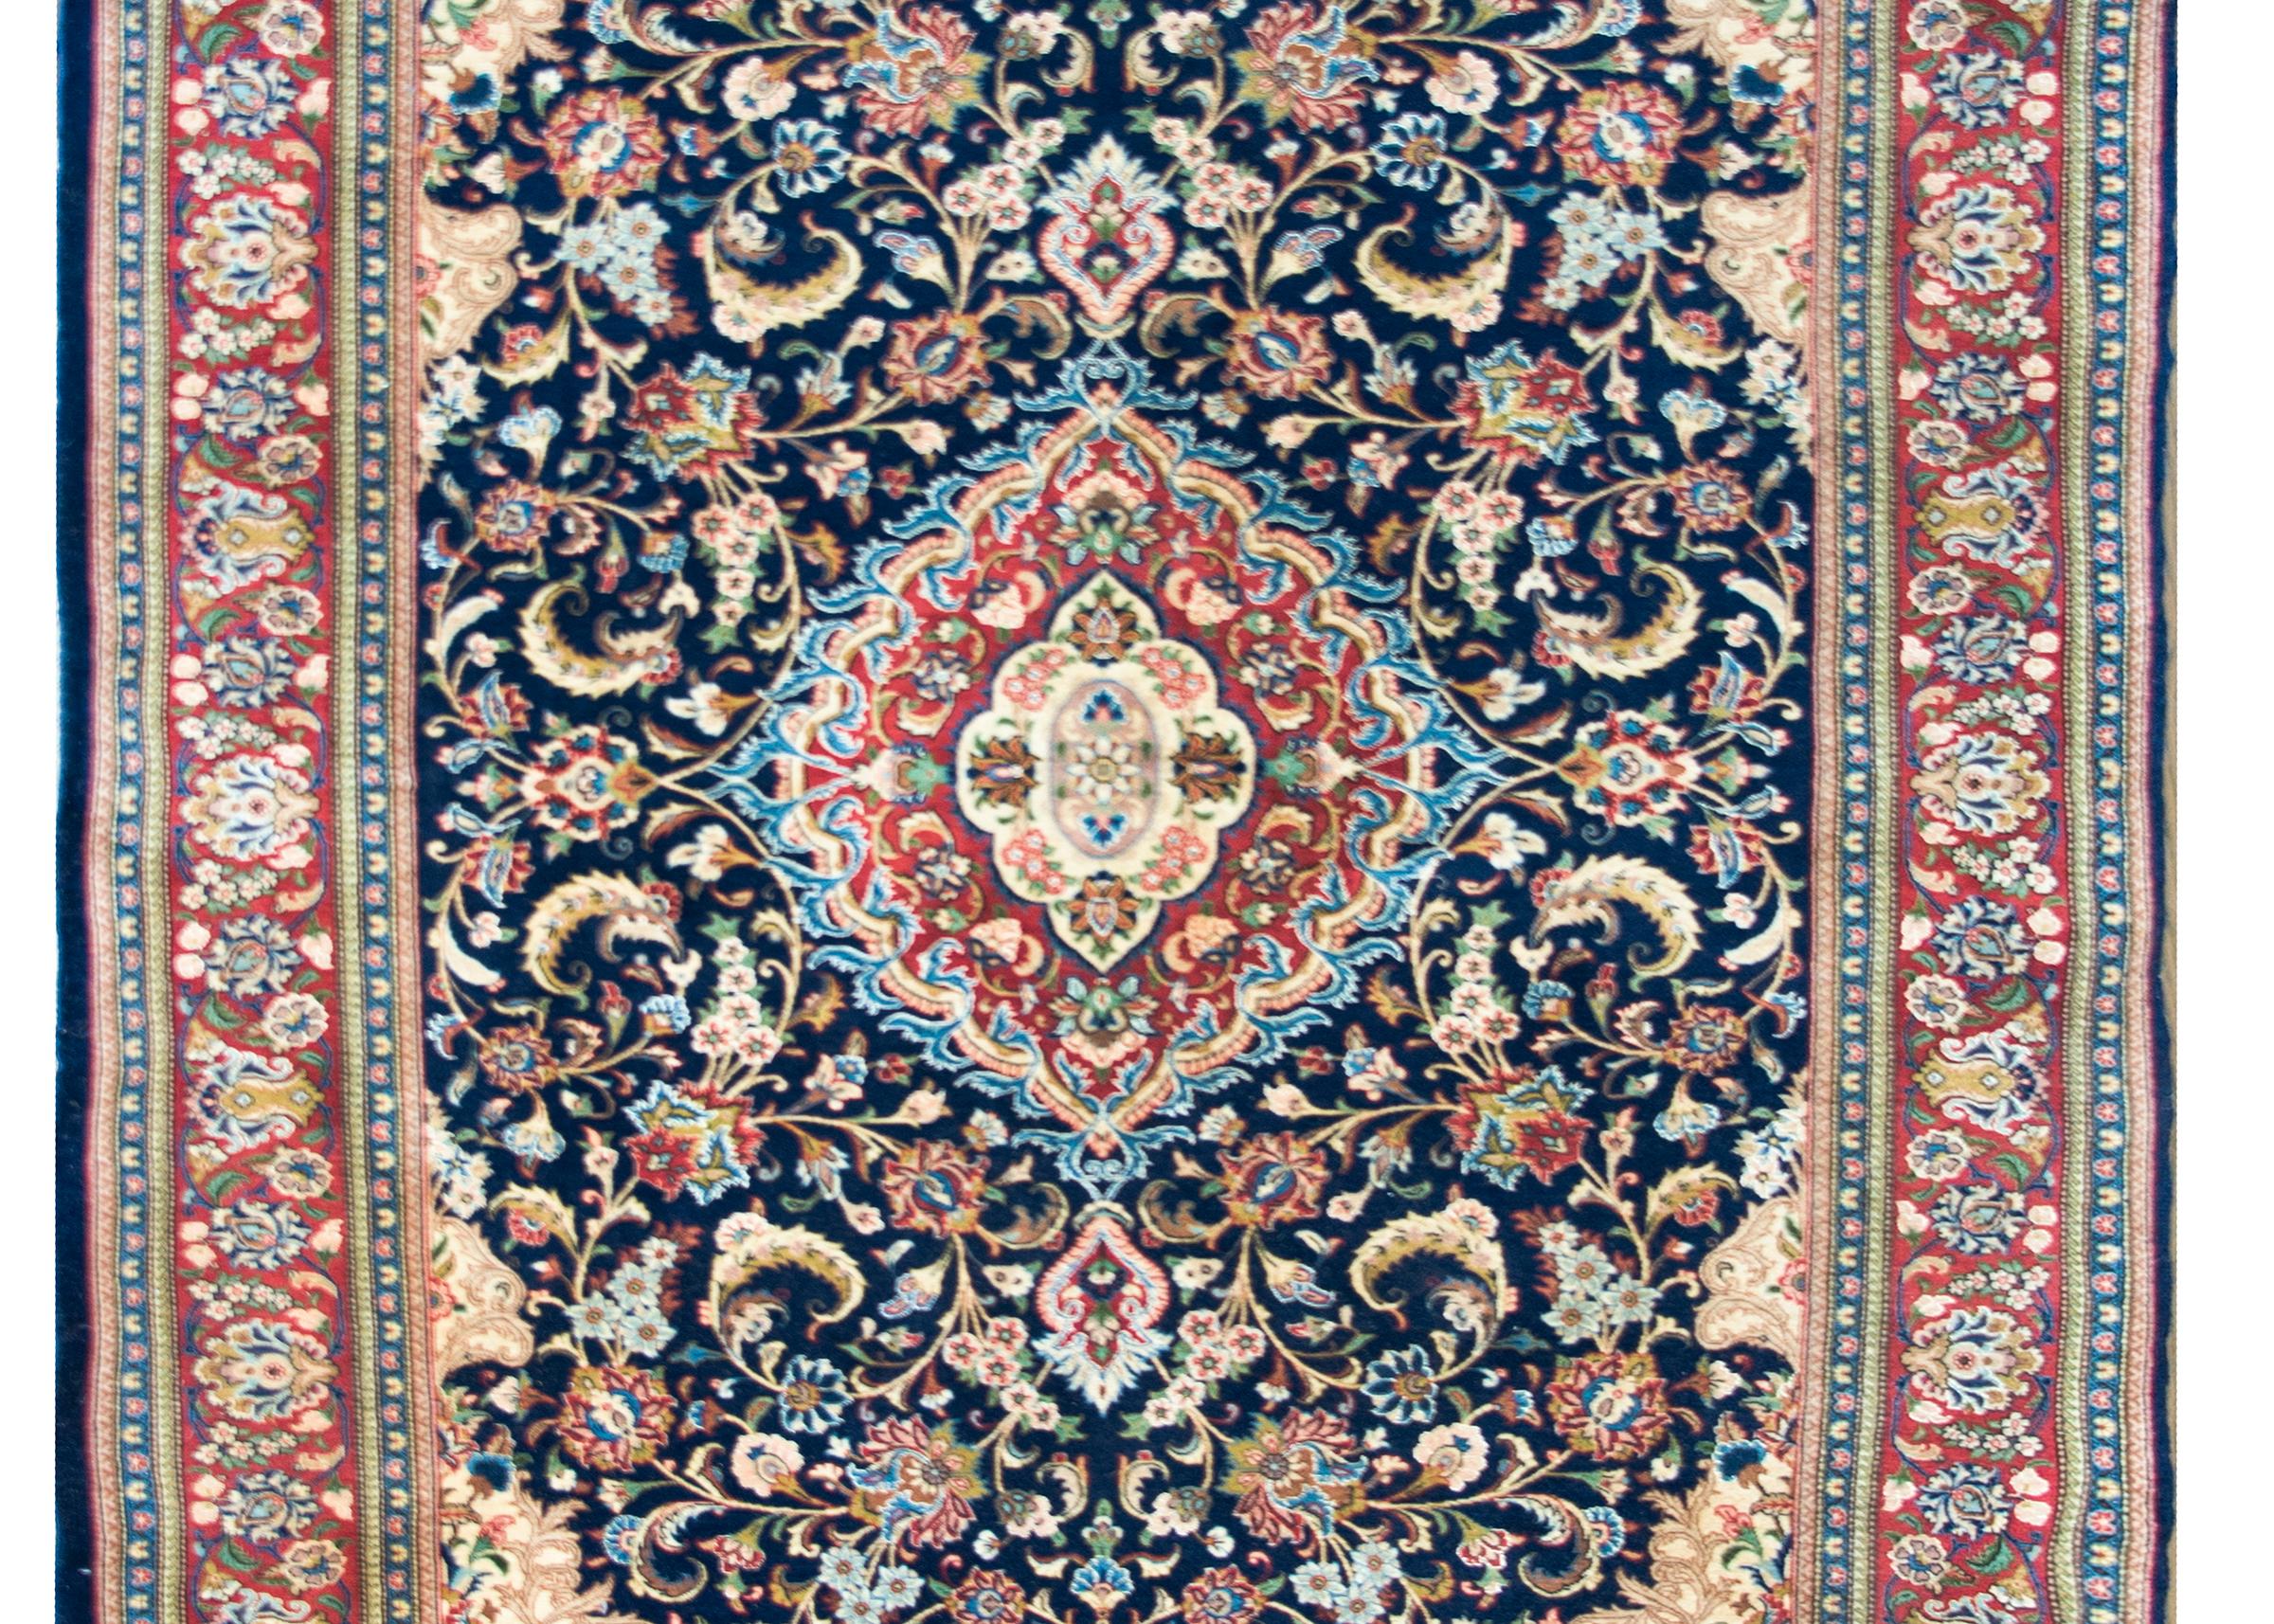 A beautiful mid-20th century Persian Kashan rug with a traditional central floral medallion living amidst a field of large-scale flowers and scrolling vines, and surrounded buy a wide repeated floral patterned central stripe flanked by pairs of